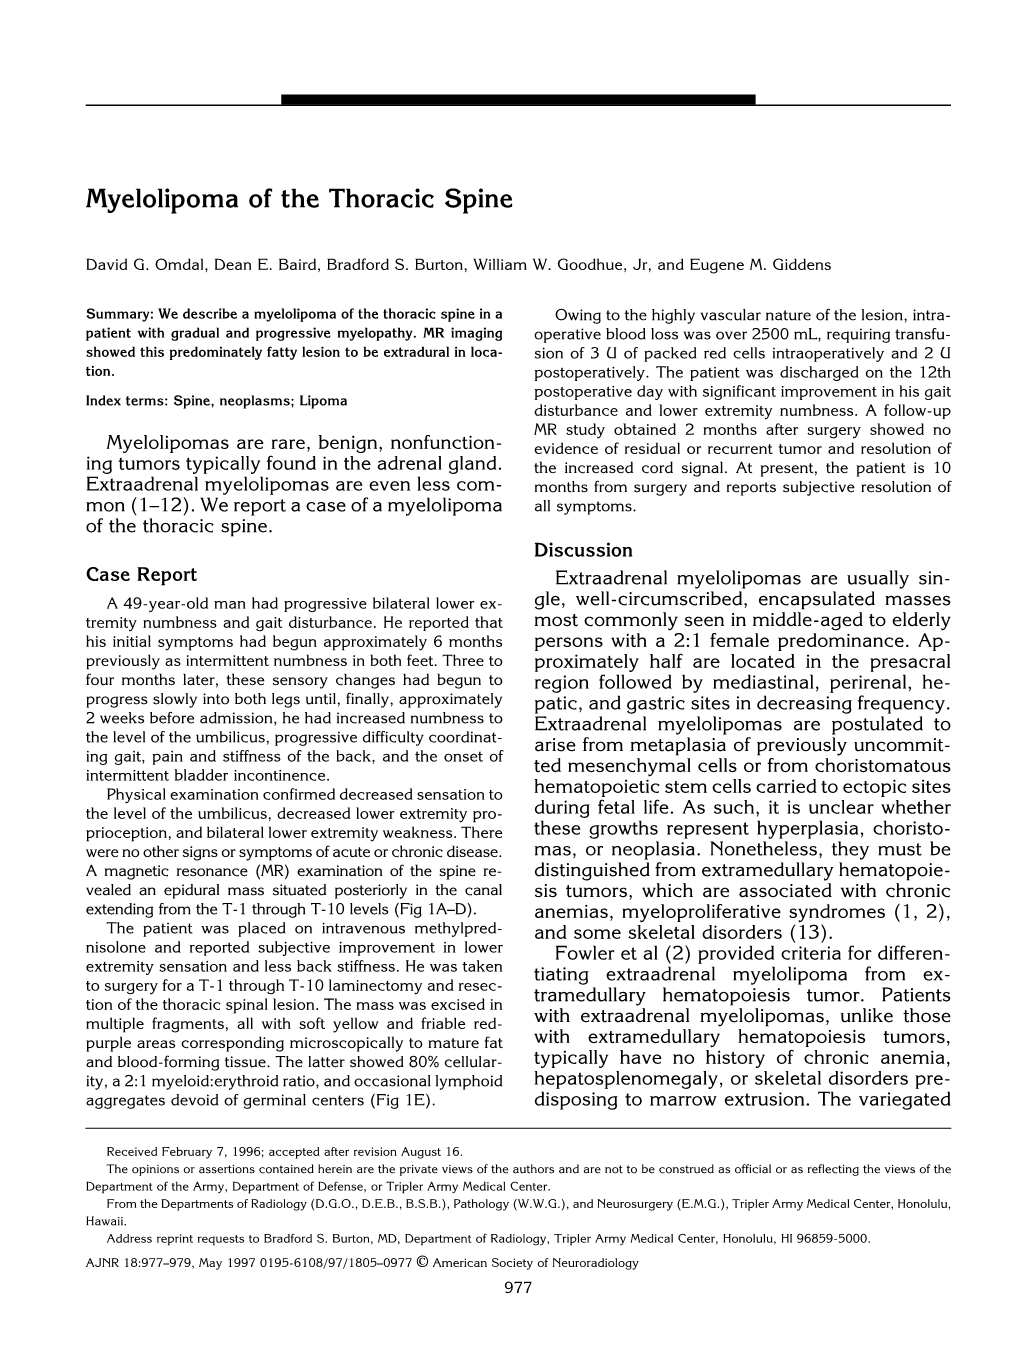 Myelolipoma of the Thoracic Spine